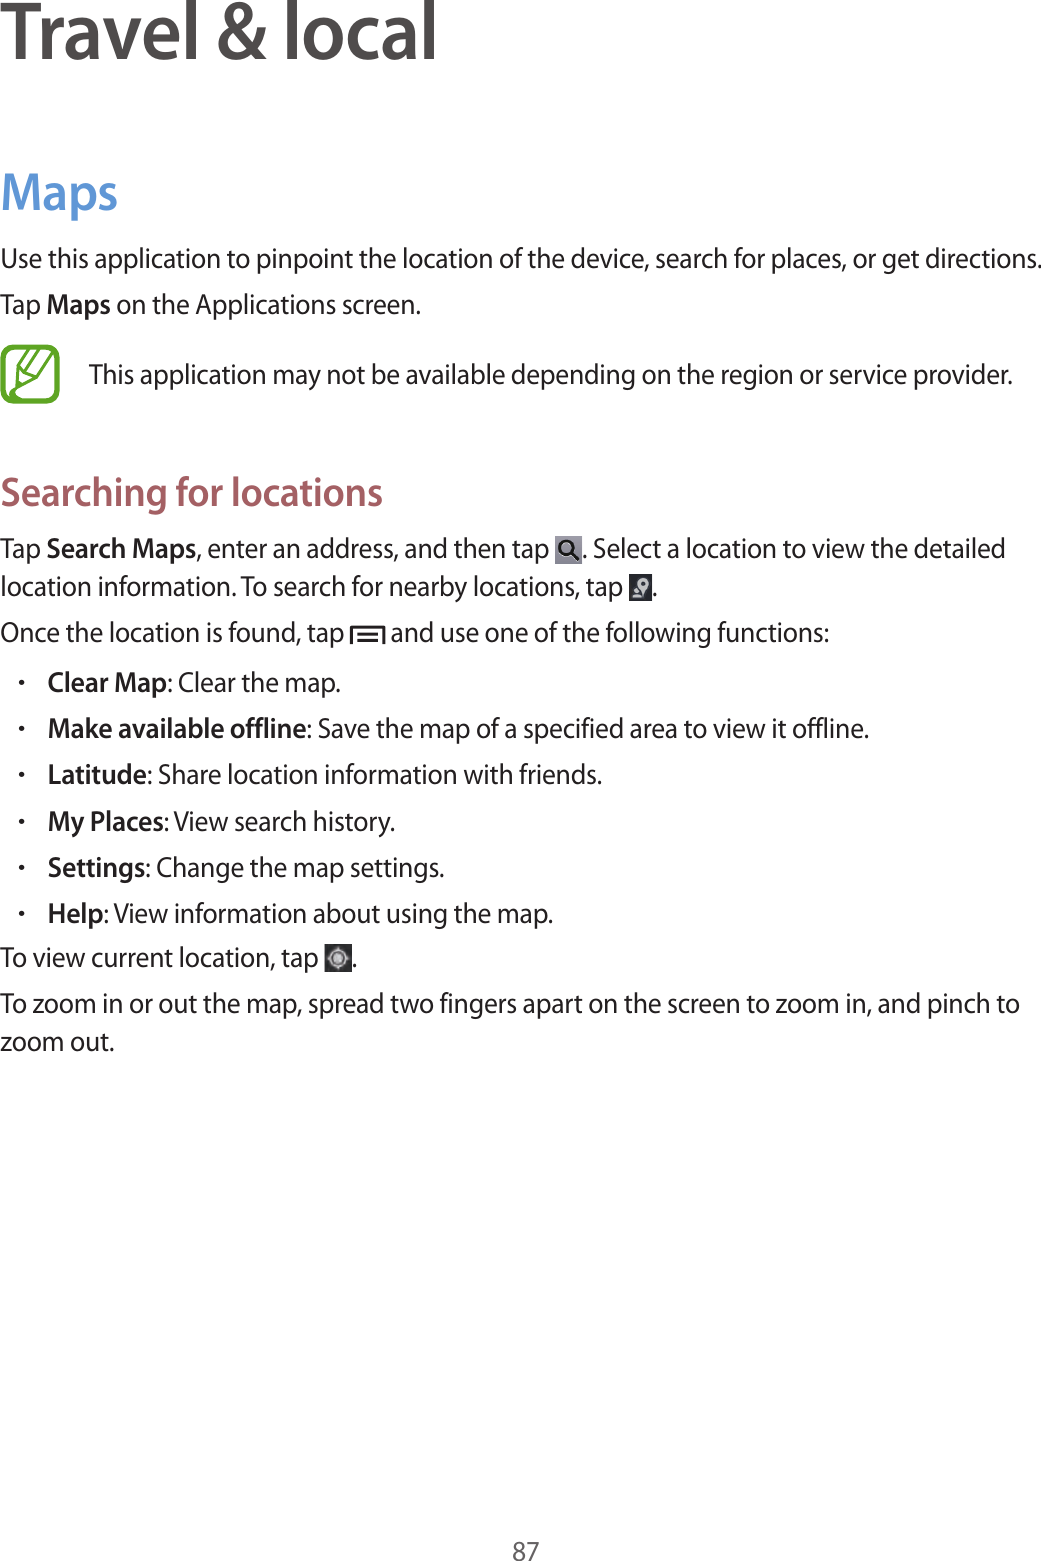 87Travel &amp; localMapsUse this application to pinpoint the location of the device, search for places, or get directions.Tap Maps on the Applications screen.This application may not be available depending on the region or service provider.Searching for locationsTap Search Maps, enter an address, and then tap  . Select a location to view the detailed location information. To search for nearby locations, tap  .Once the location is found, tap   and use one of the following functions:•Clear Map: Clear the map.•Make available offline: Save the map of a specified area to view it offline.•Latitude: Share location information with friends.•My Places: View search history.•Settings: Change the map settings.•Help: View information about using the map.To view current location, tap  .To zoom in or out the map, spread two fingers apart on the screen to zoom in, and pinch to zoom out.